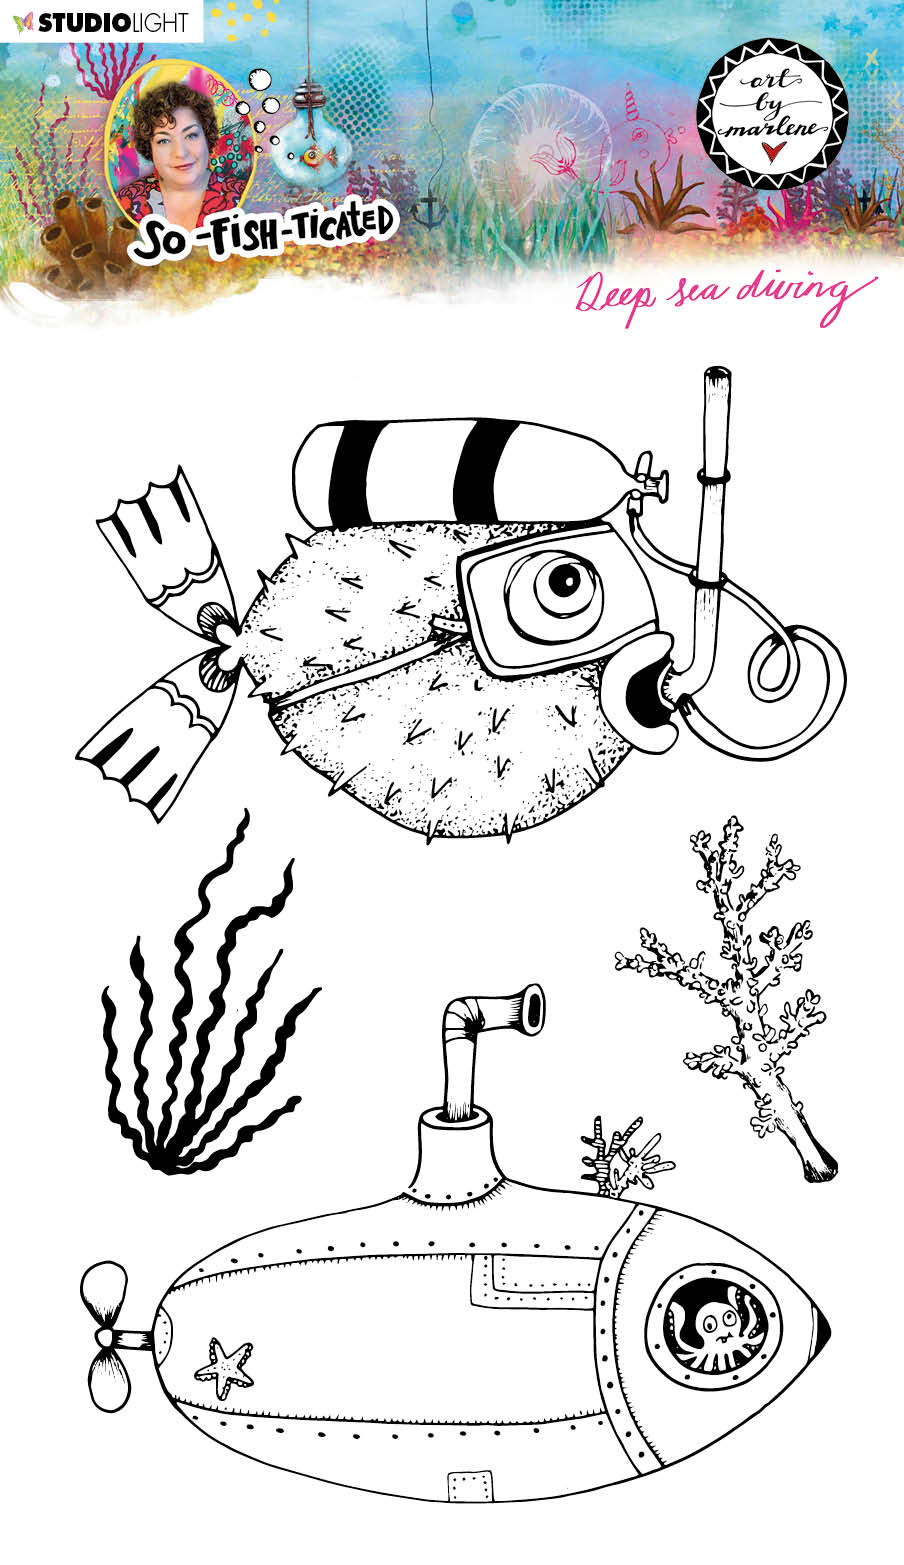 Art By Marlene  So-Fish-Ticated  Clear Stamp  Deep Sea Diving